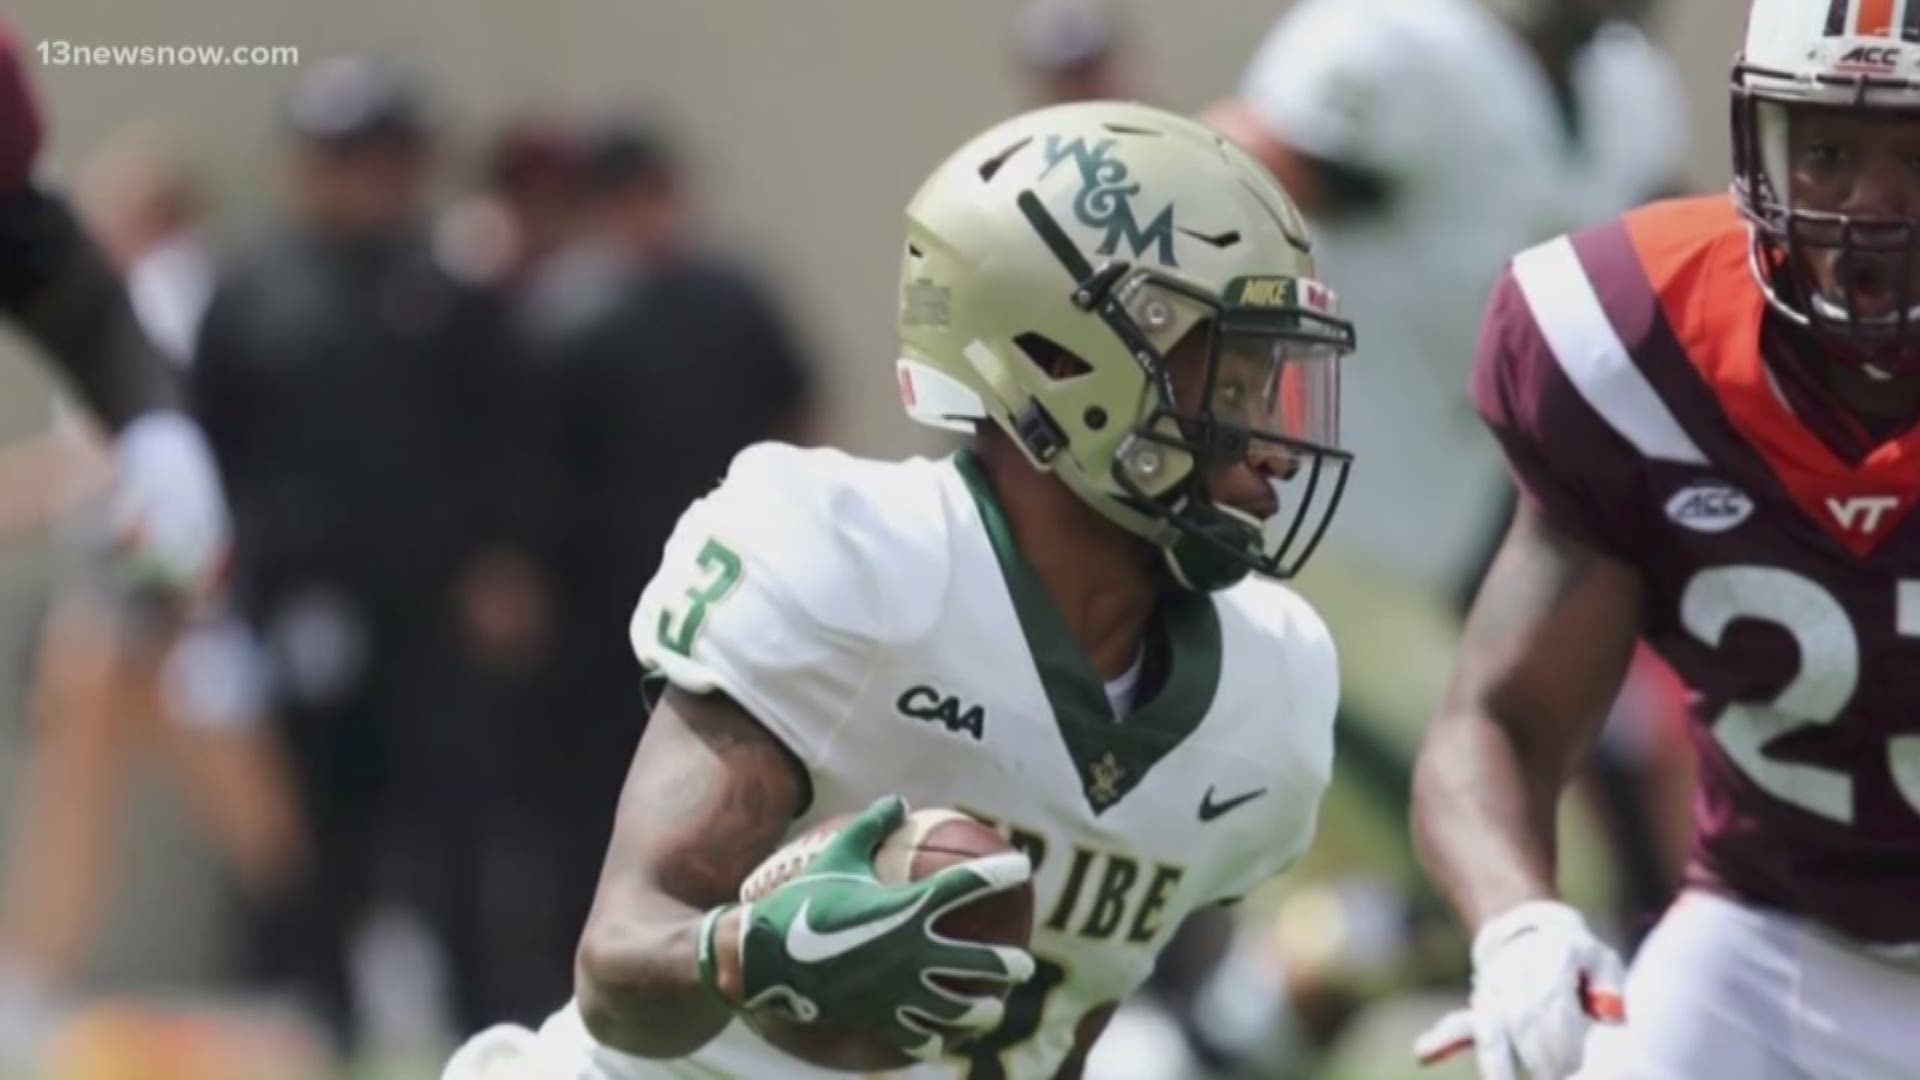 Police are continuing to search for the person who shot and killed Nathan Evans, a 19-year-old running back for The College of William & Mary.